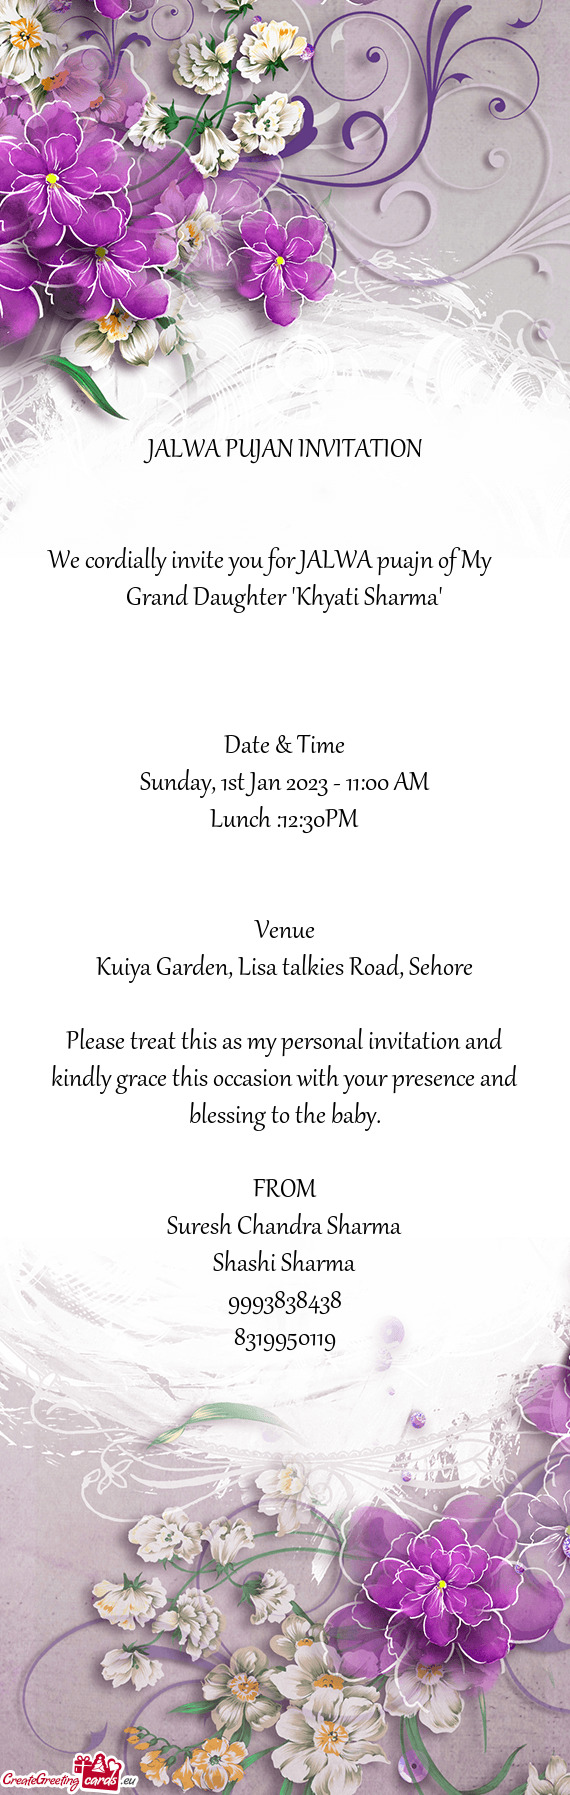 We cordially invite you for JALWA puajn of My  Grand Daughter "Khyati Sharma"